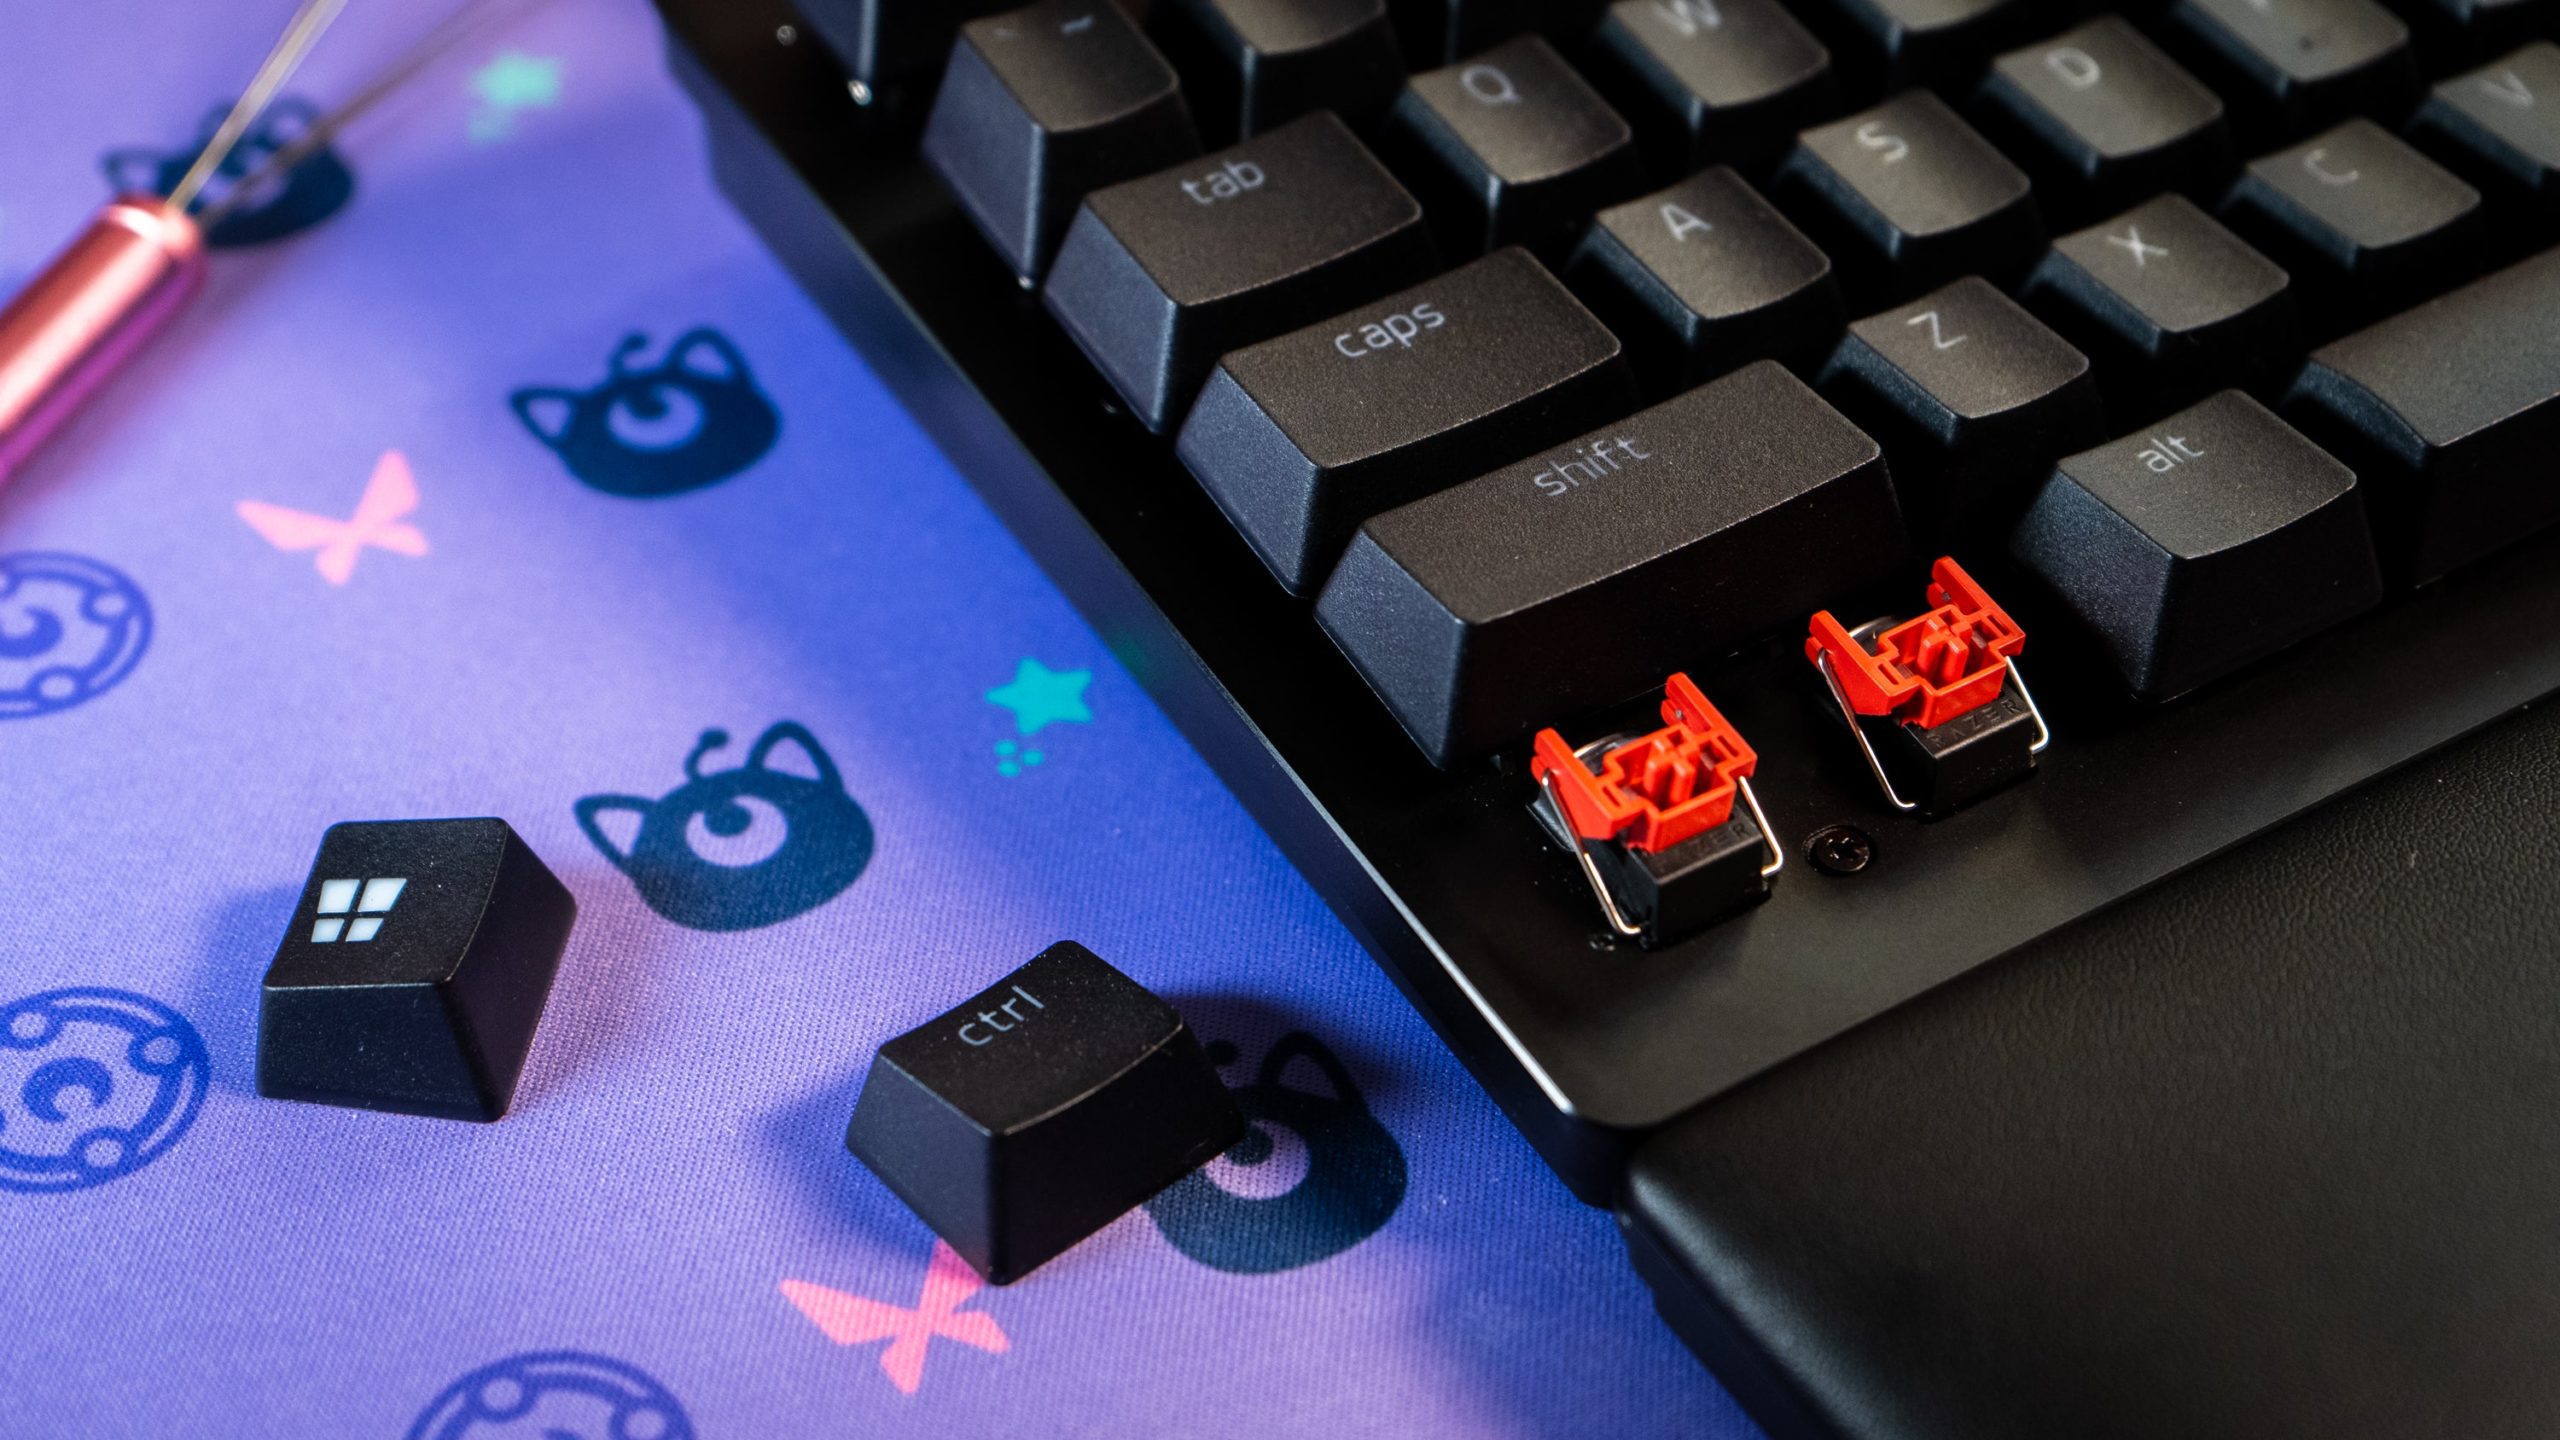 Razer's Linear Red optical switches offer a quiet, soft typing experience.  (Photo: Florence Ion / Gizmodo)